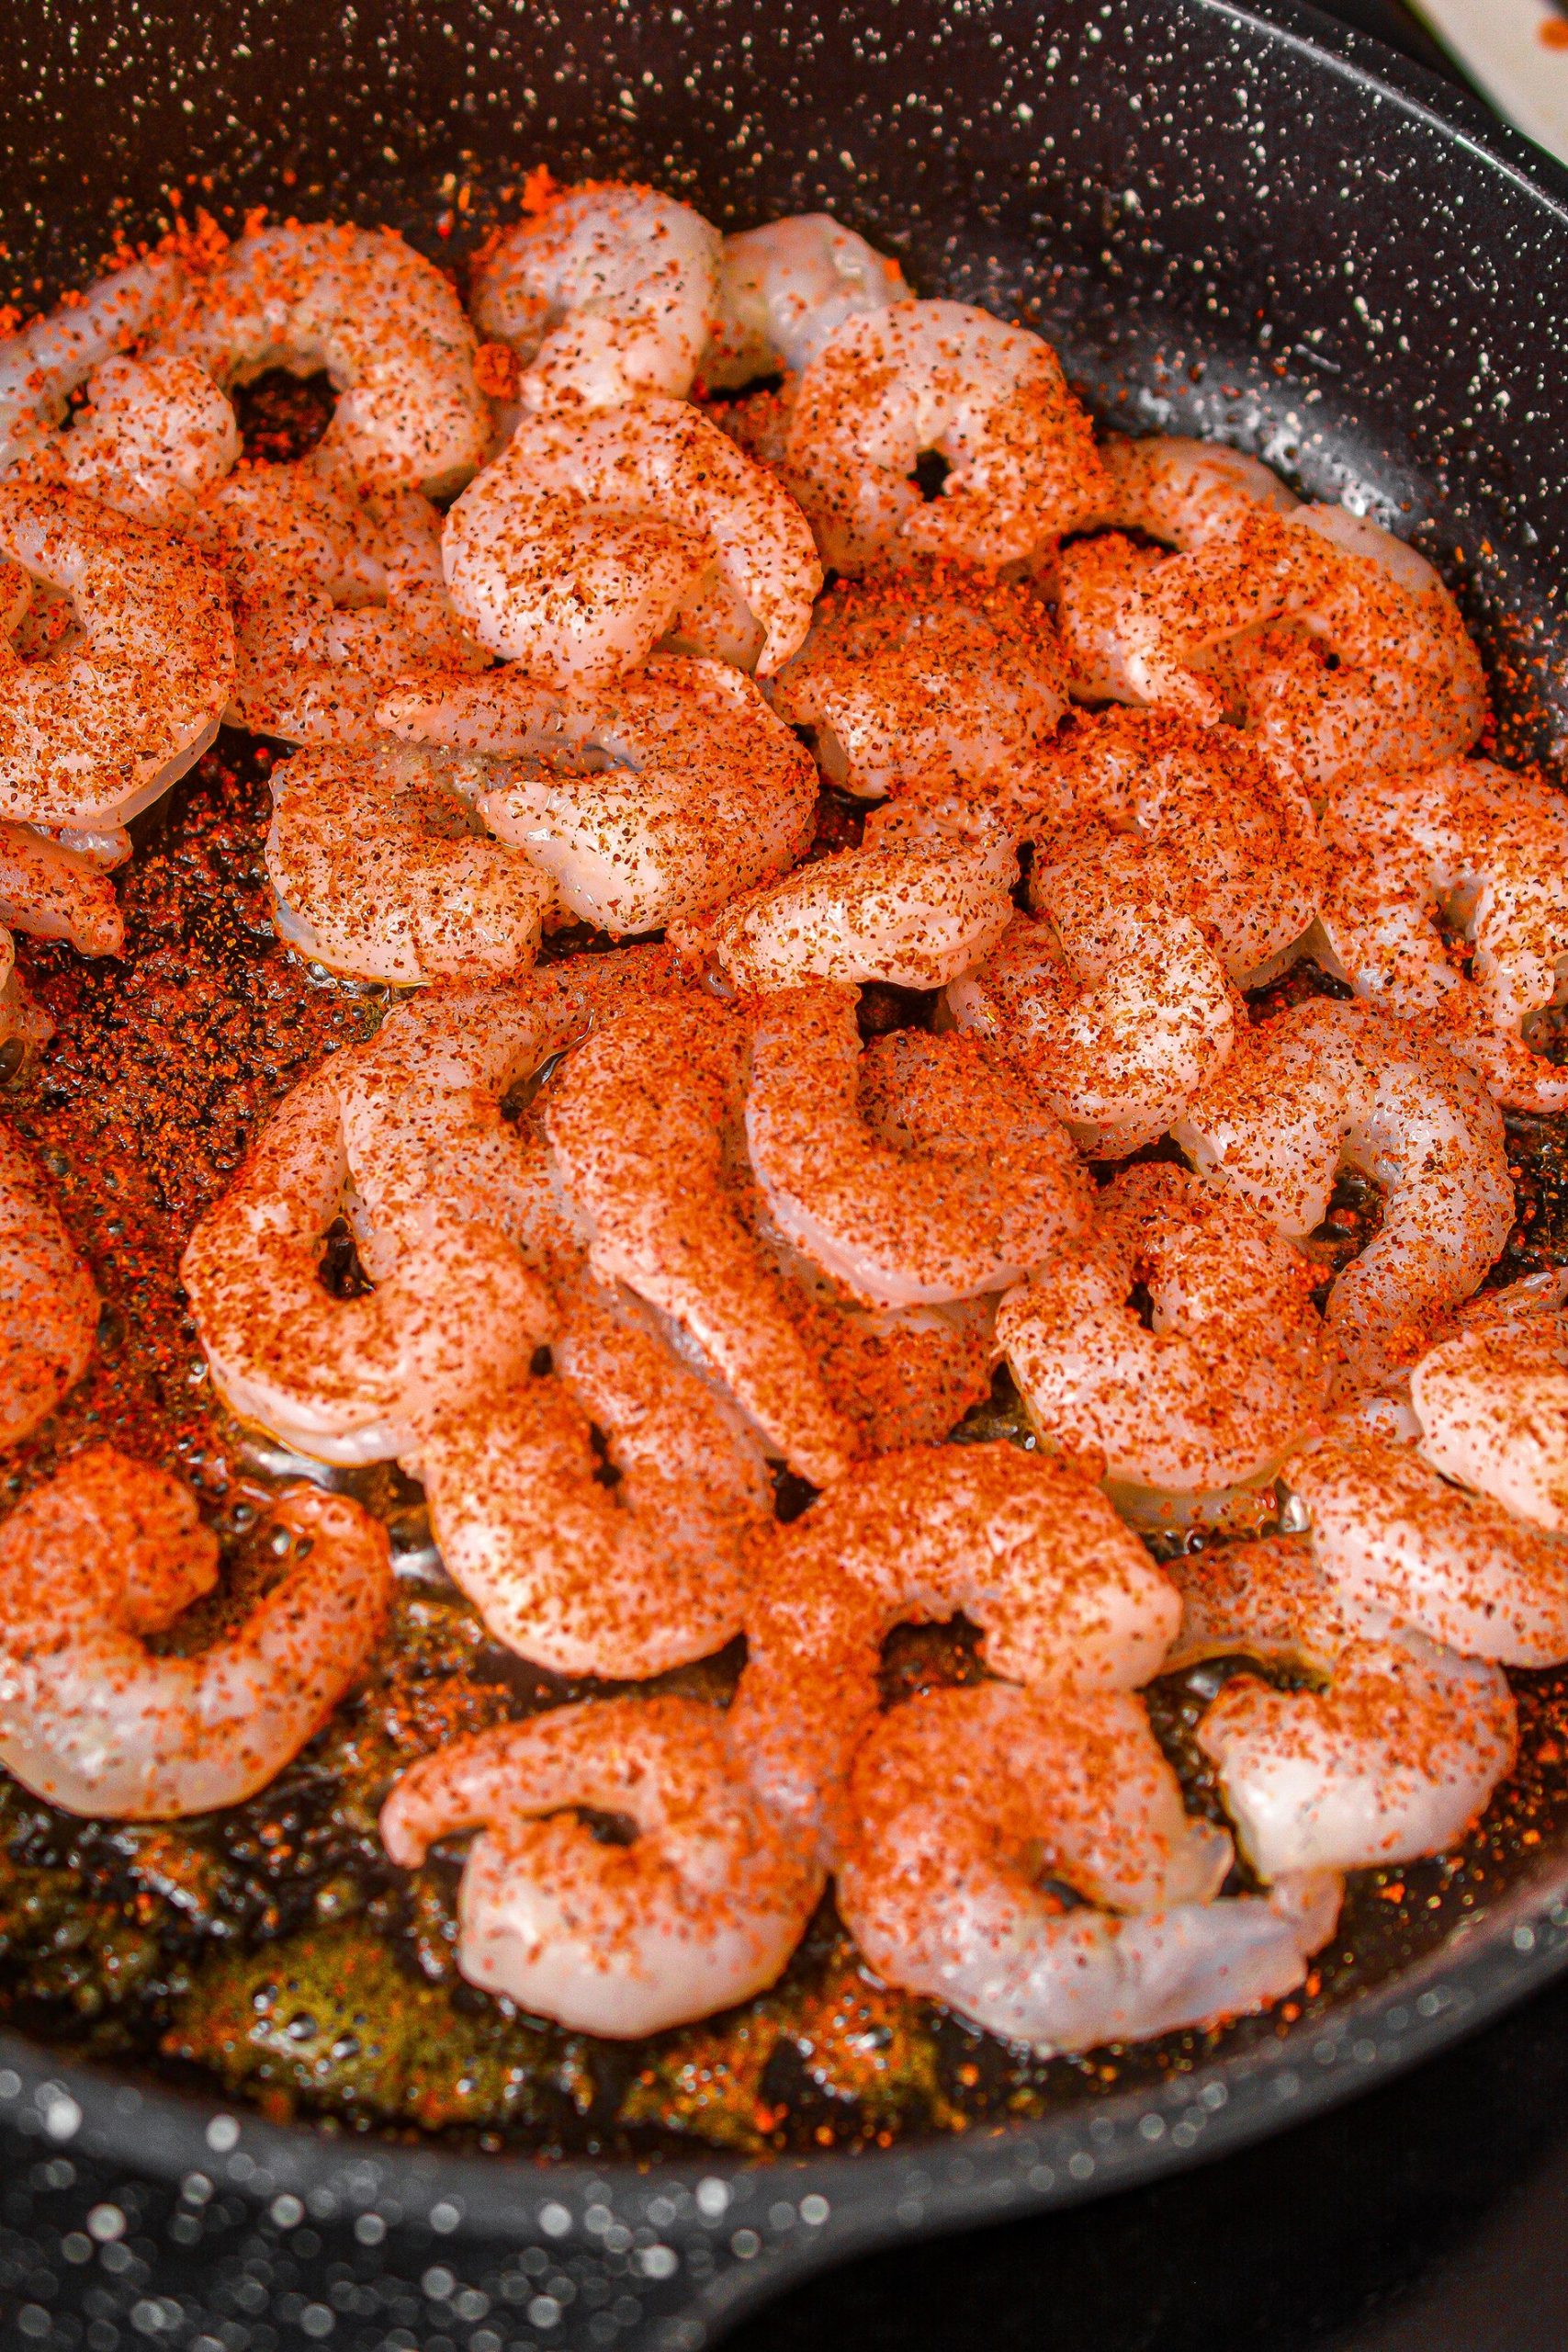 Add the shrimp to the skillet with the taco seasoning, and saute until cooked through.